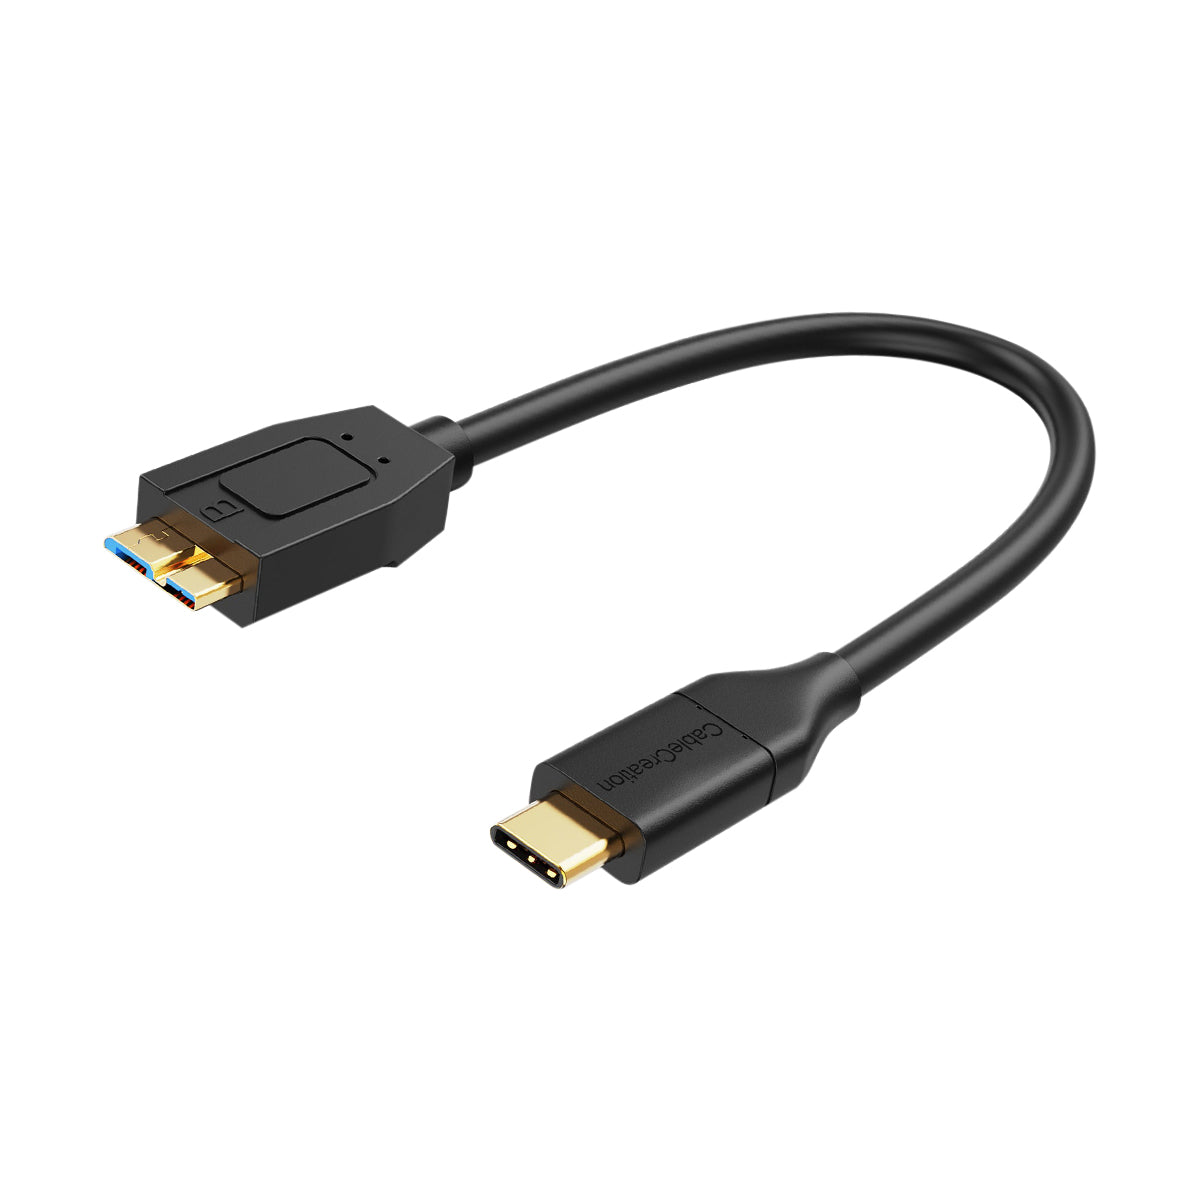  Cable Matters Type-C USB 3.1 Type B Cable (USB-C / USB C USB B  3.0 / Type-C USB 3.1 to USB B ) in Black 3.3 Feet : Electronics